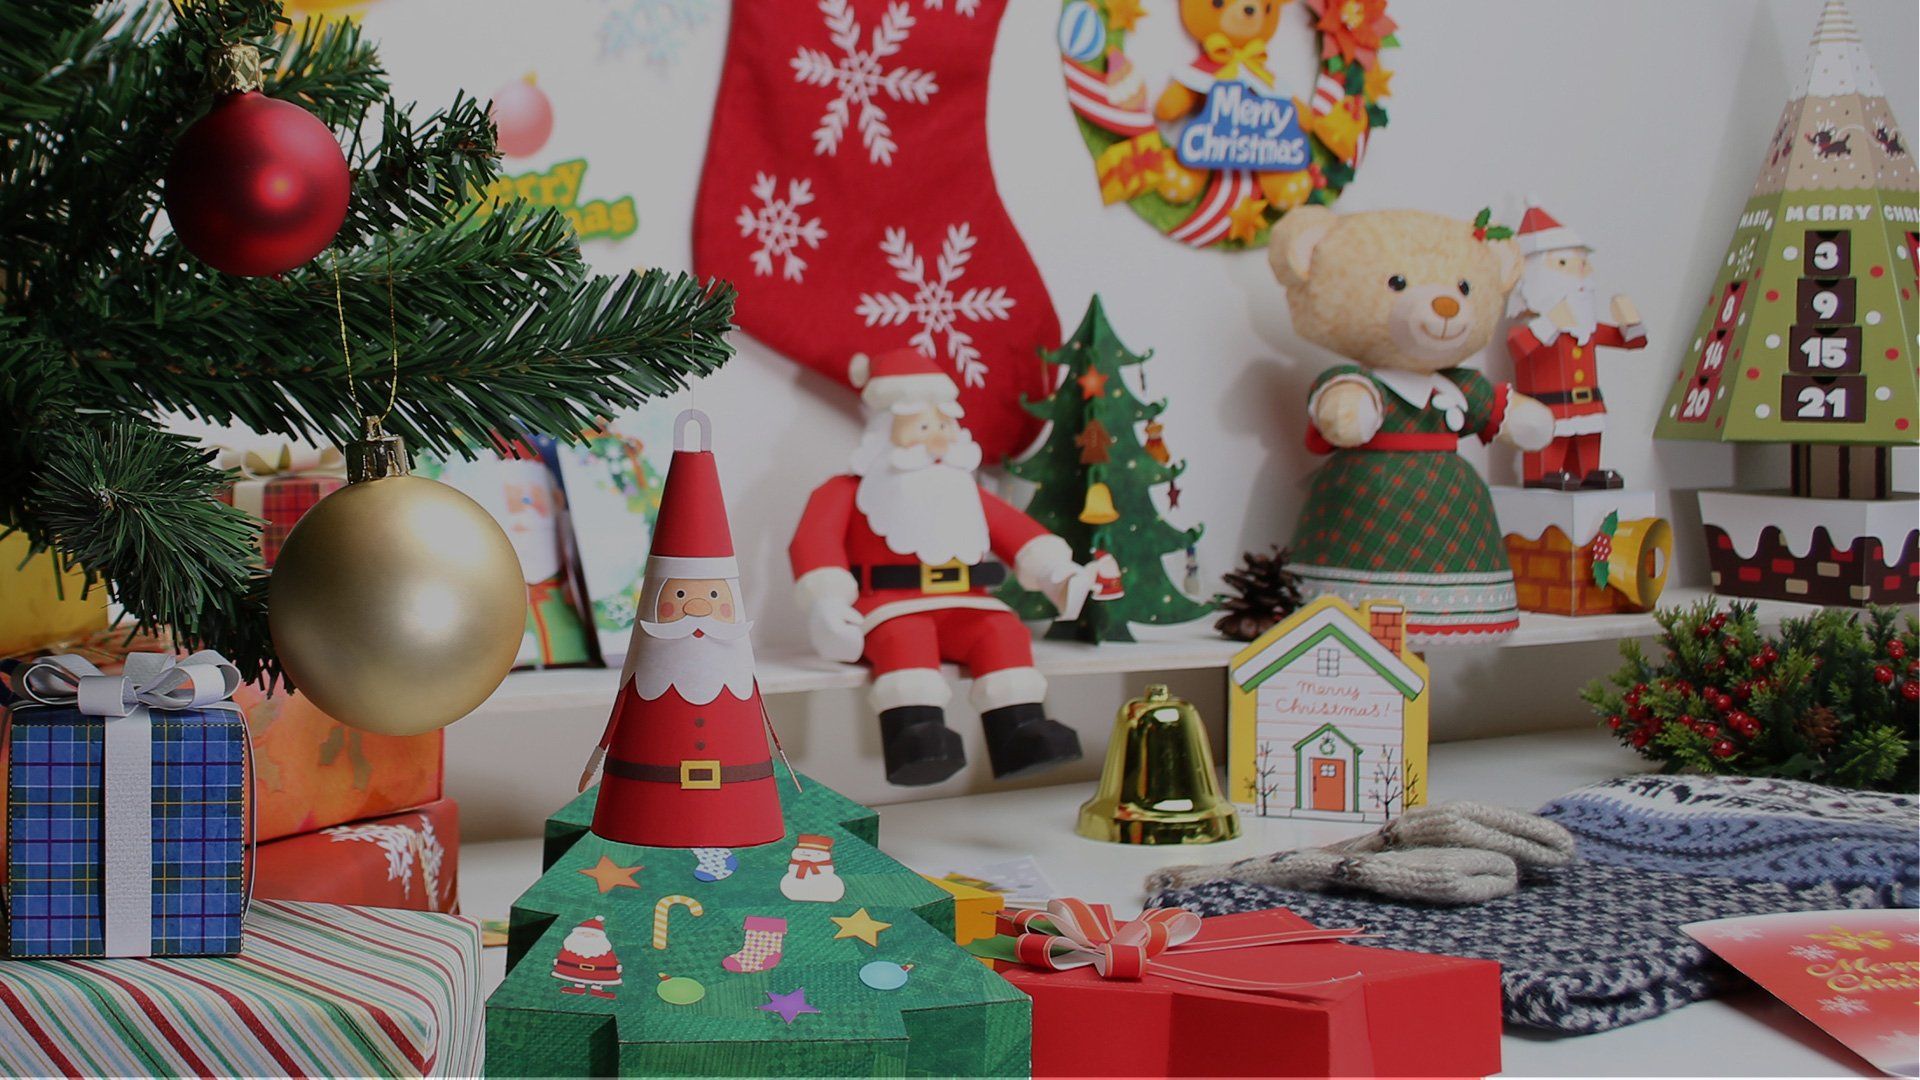 A table is filled with Christmas-themed paper crafted decorations and gifts.